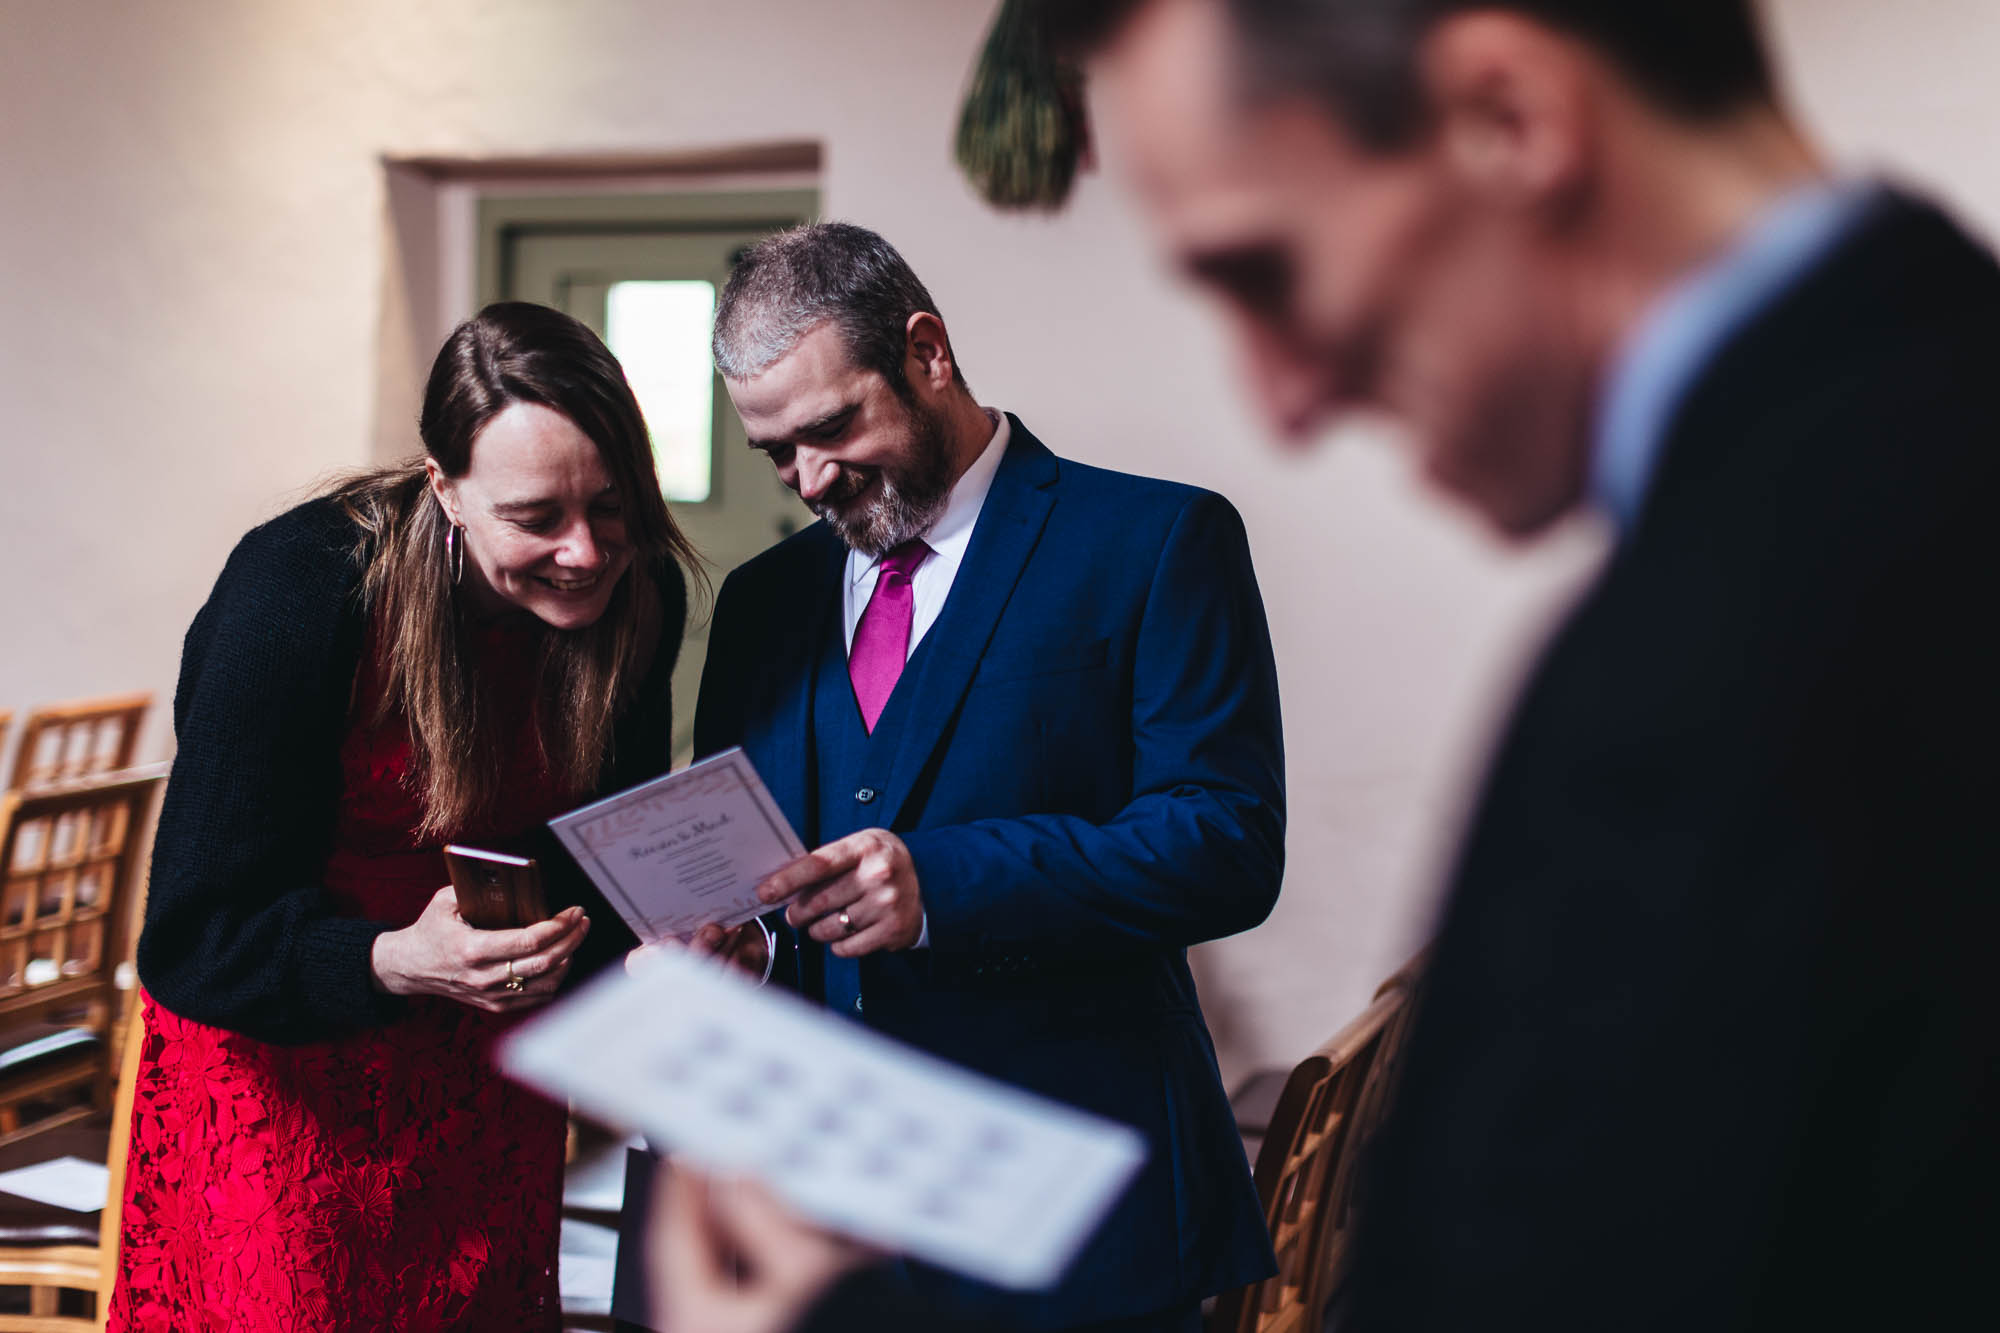 Wedding guests look at the order of ceremonies stationery for wedding